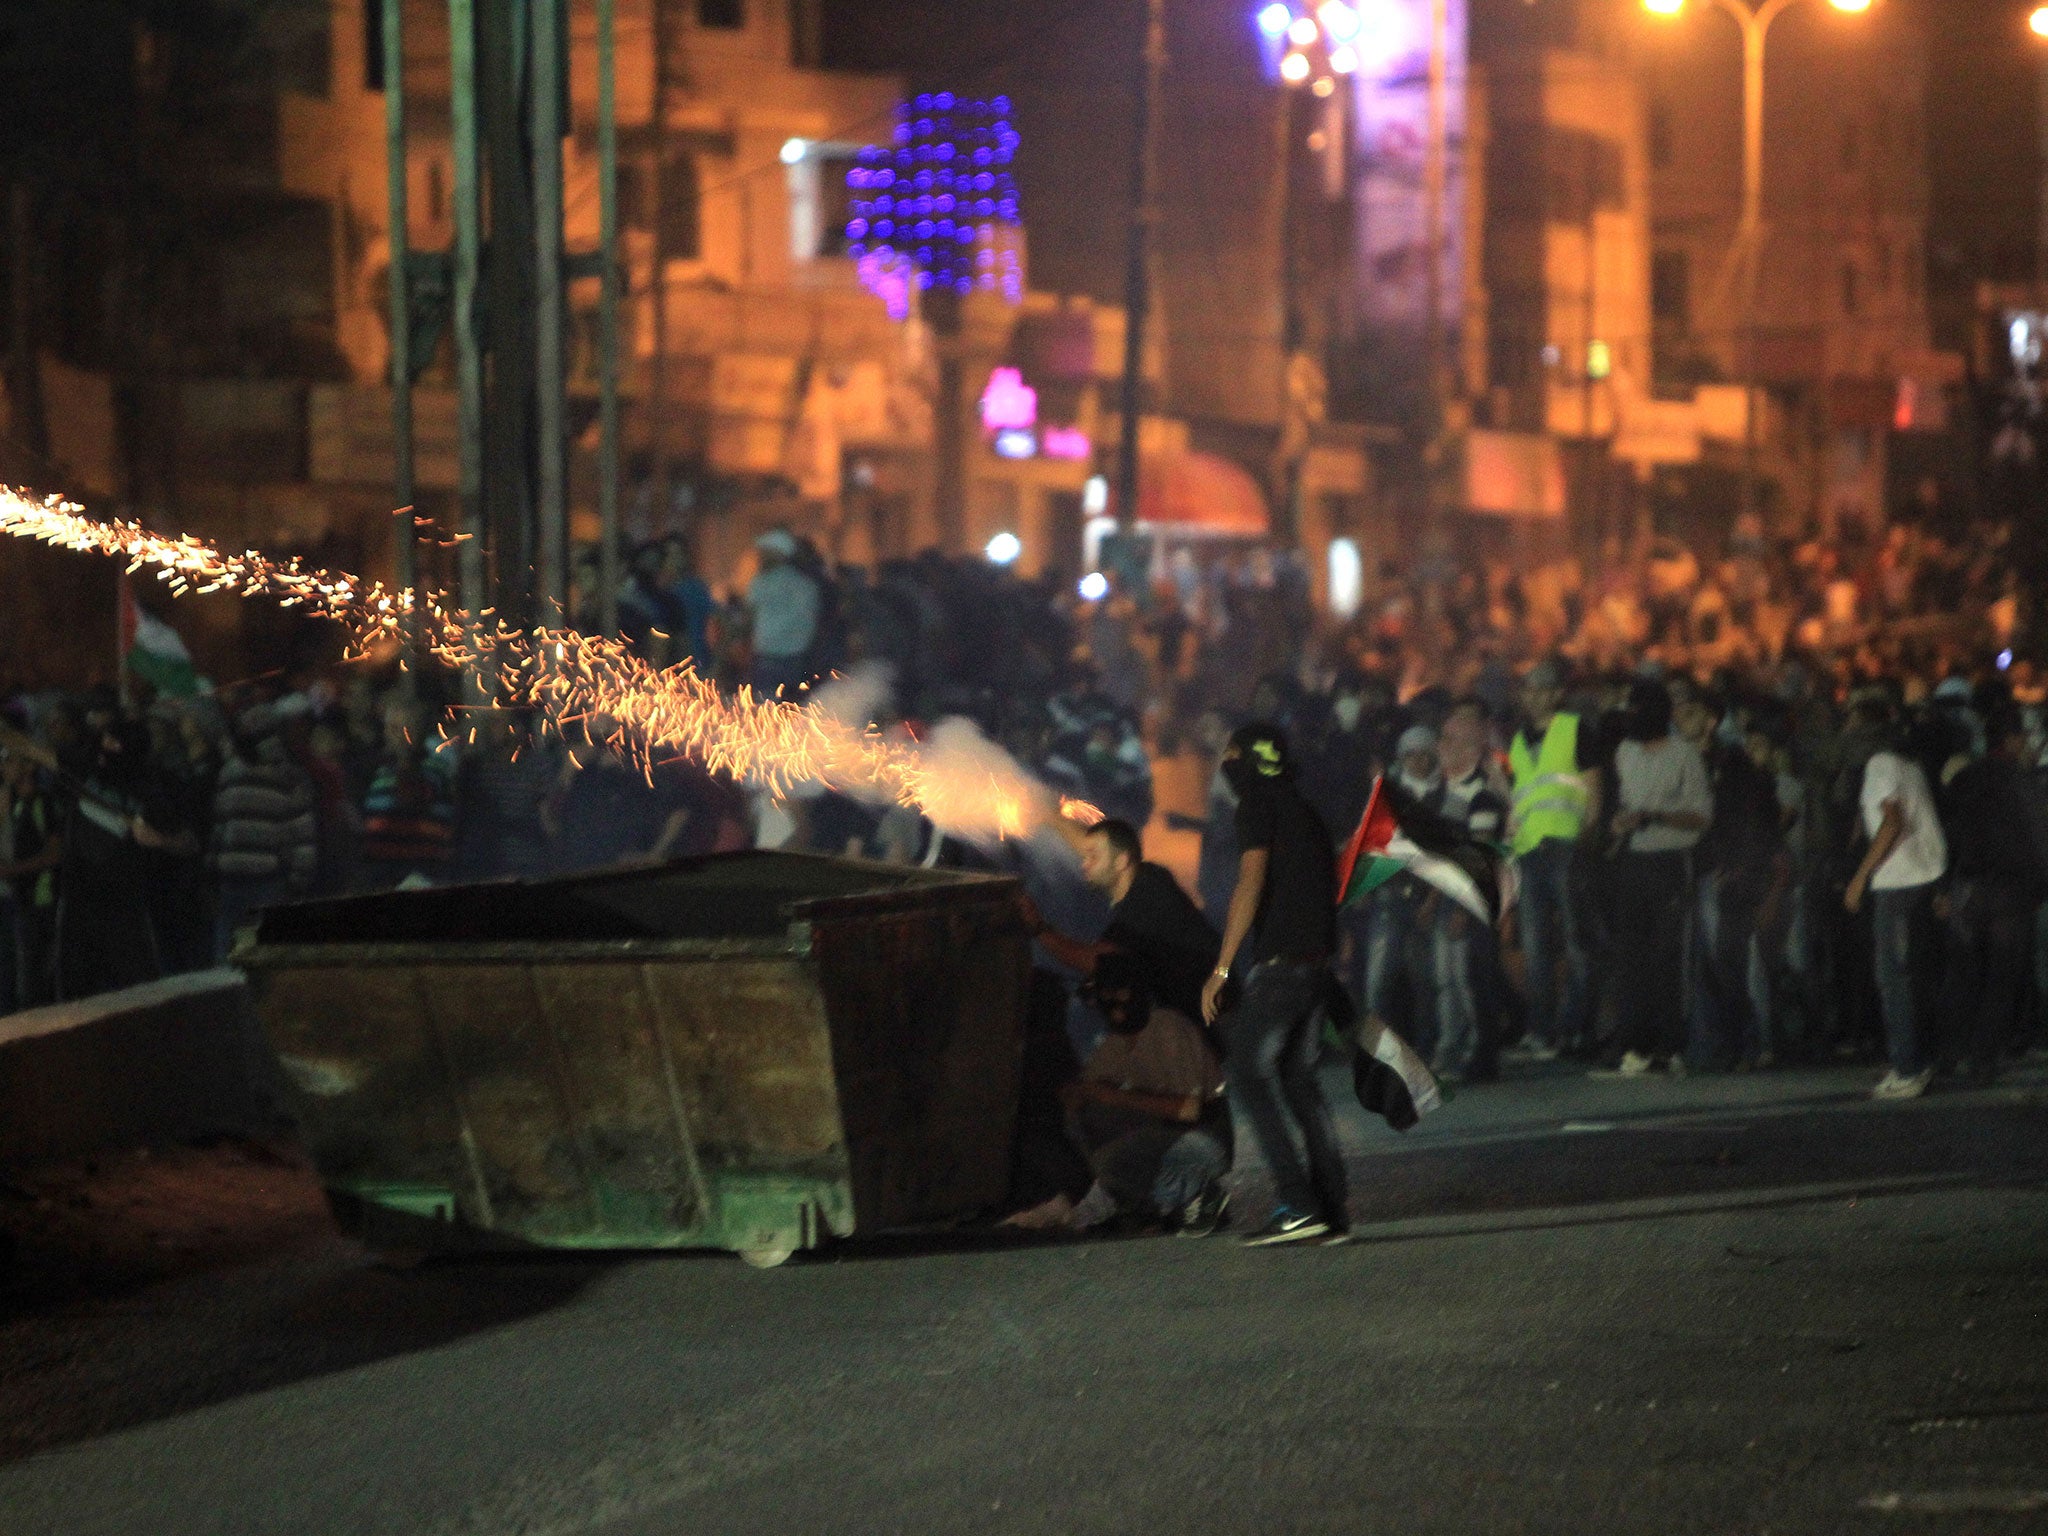 Israel reports say that protesters threw rocks and other missiles in protest